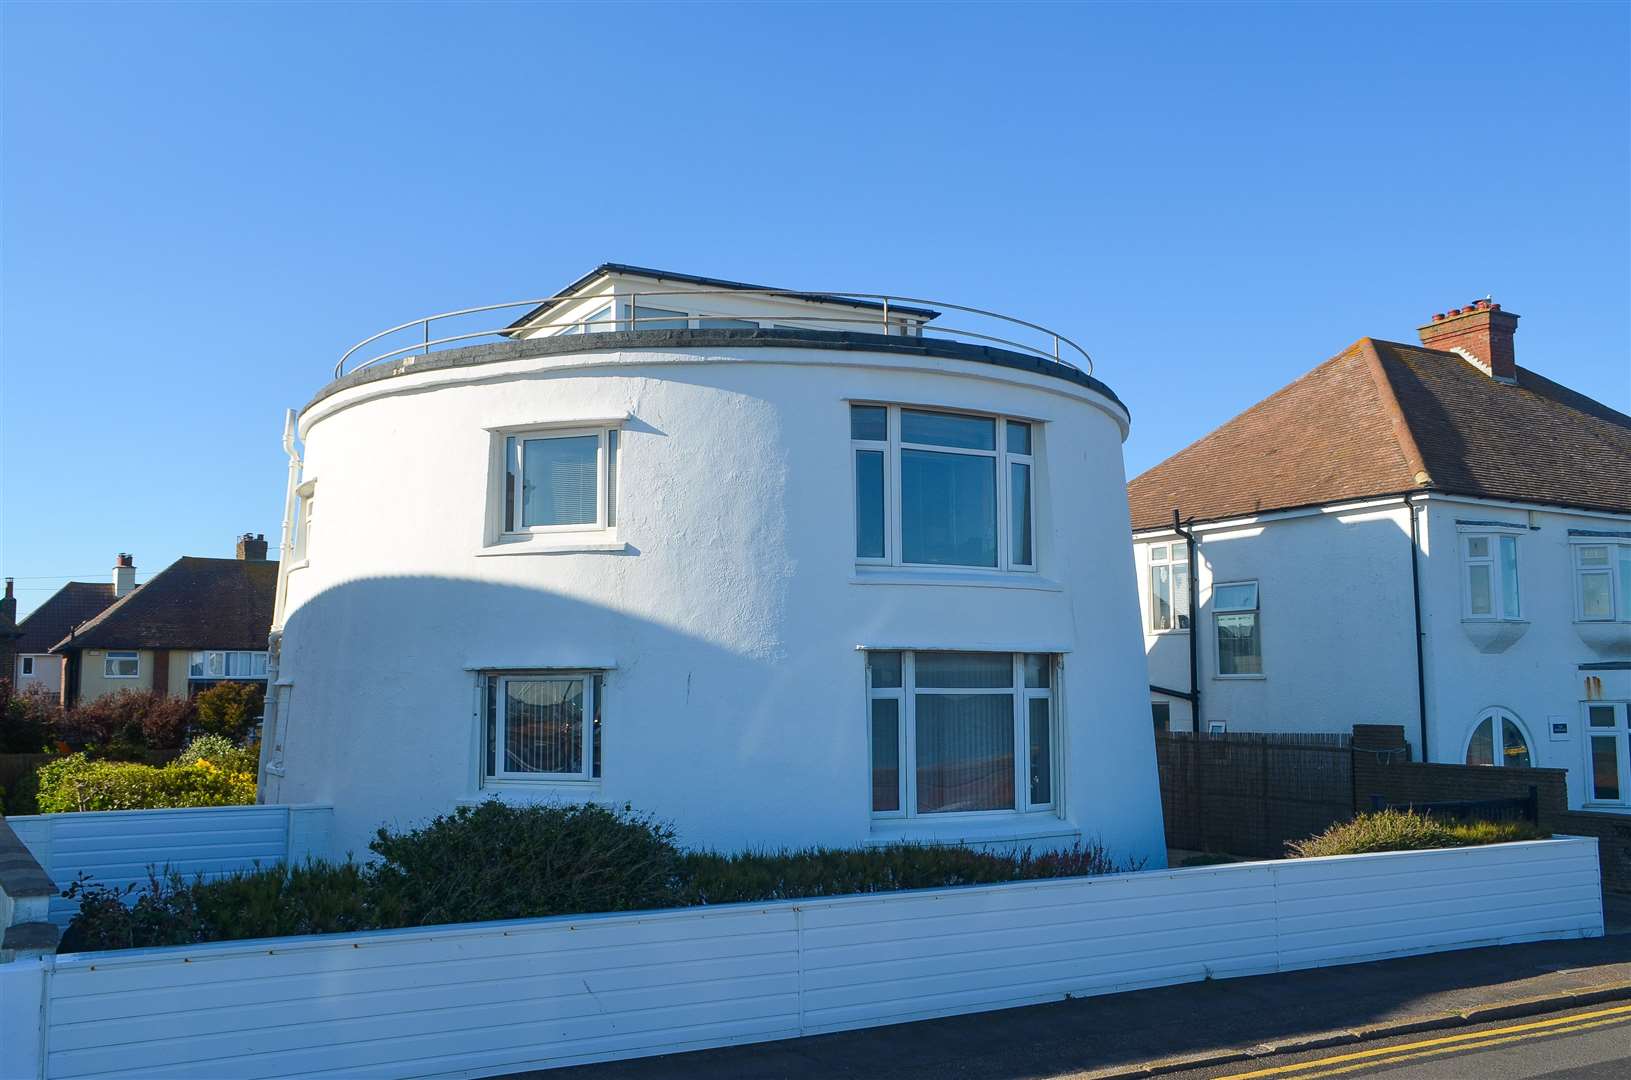 Converted Martello Tower in Hythe